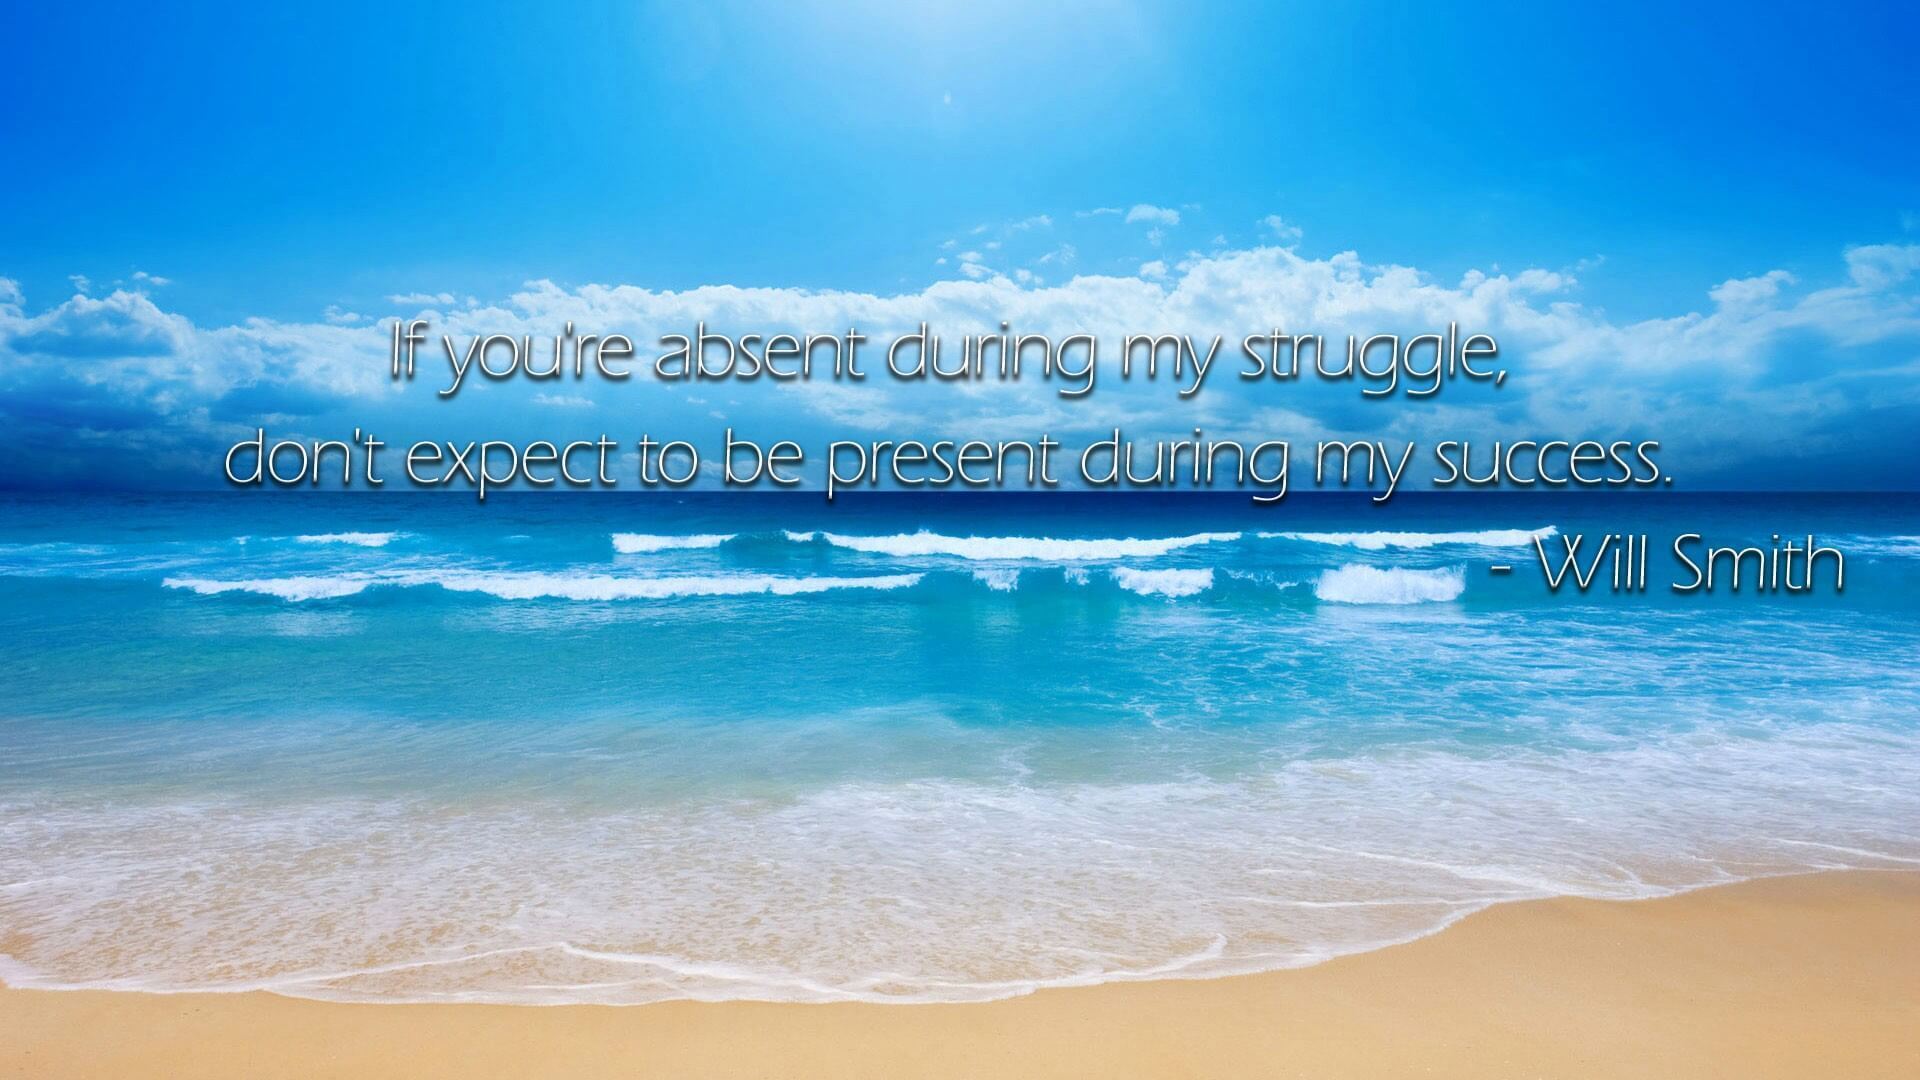 Beach Themed Quotes Wallpapers